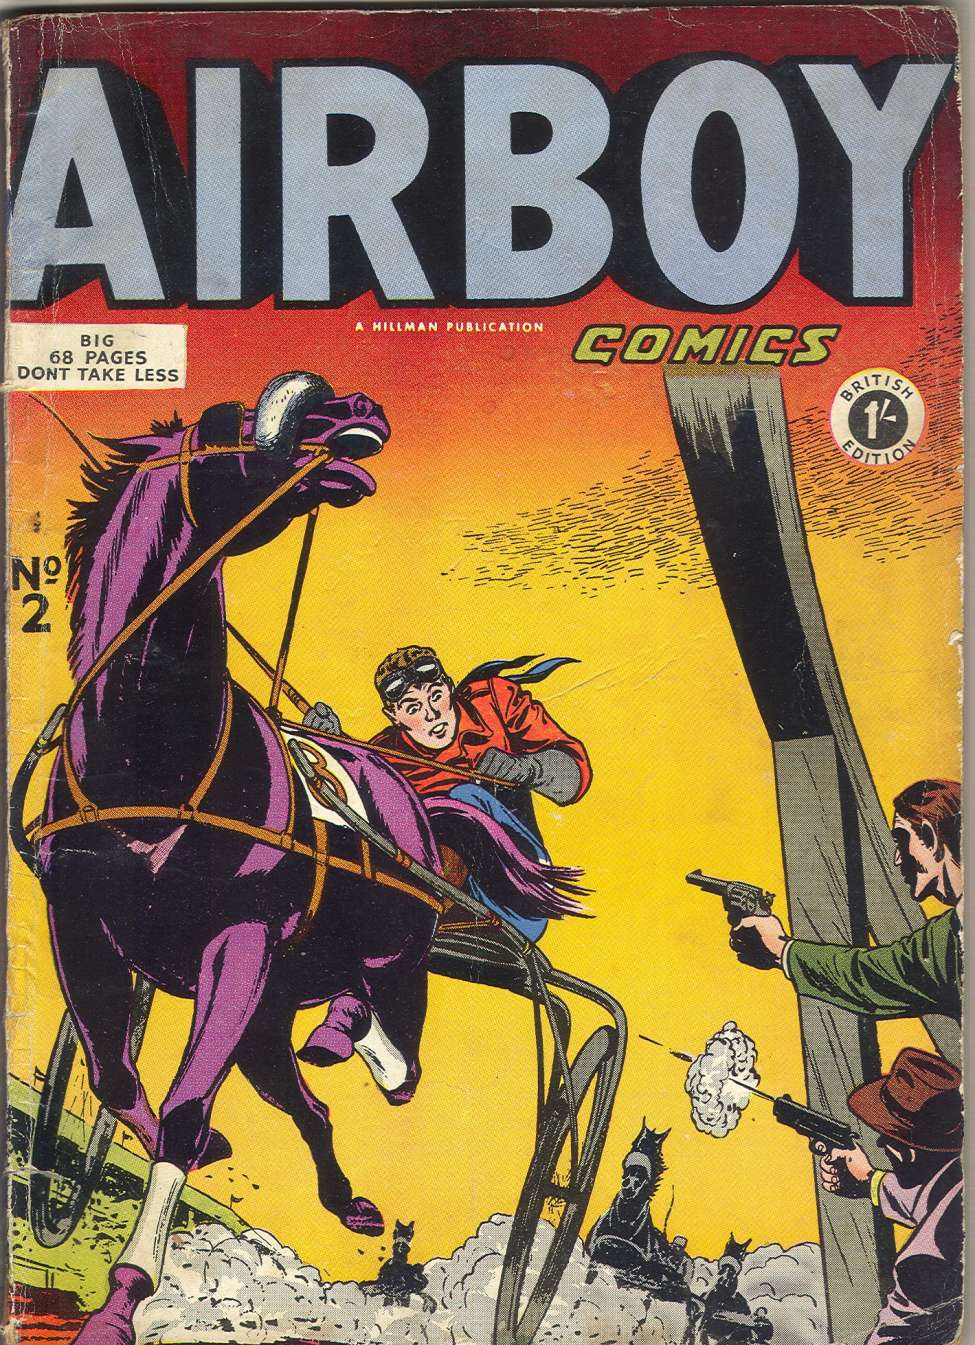 Book Cover For Airboy Comics 2